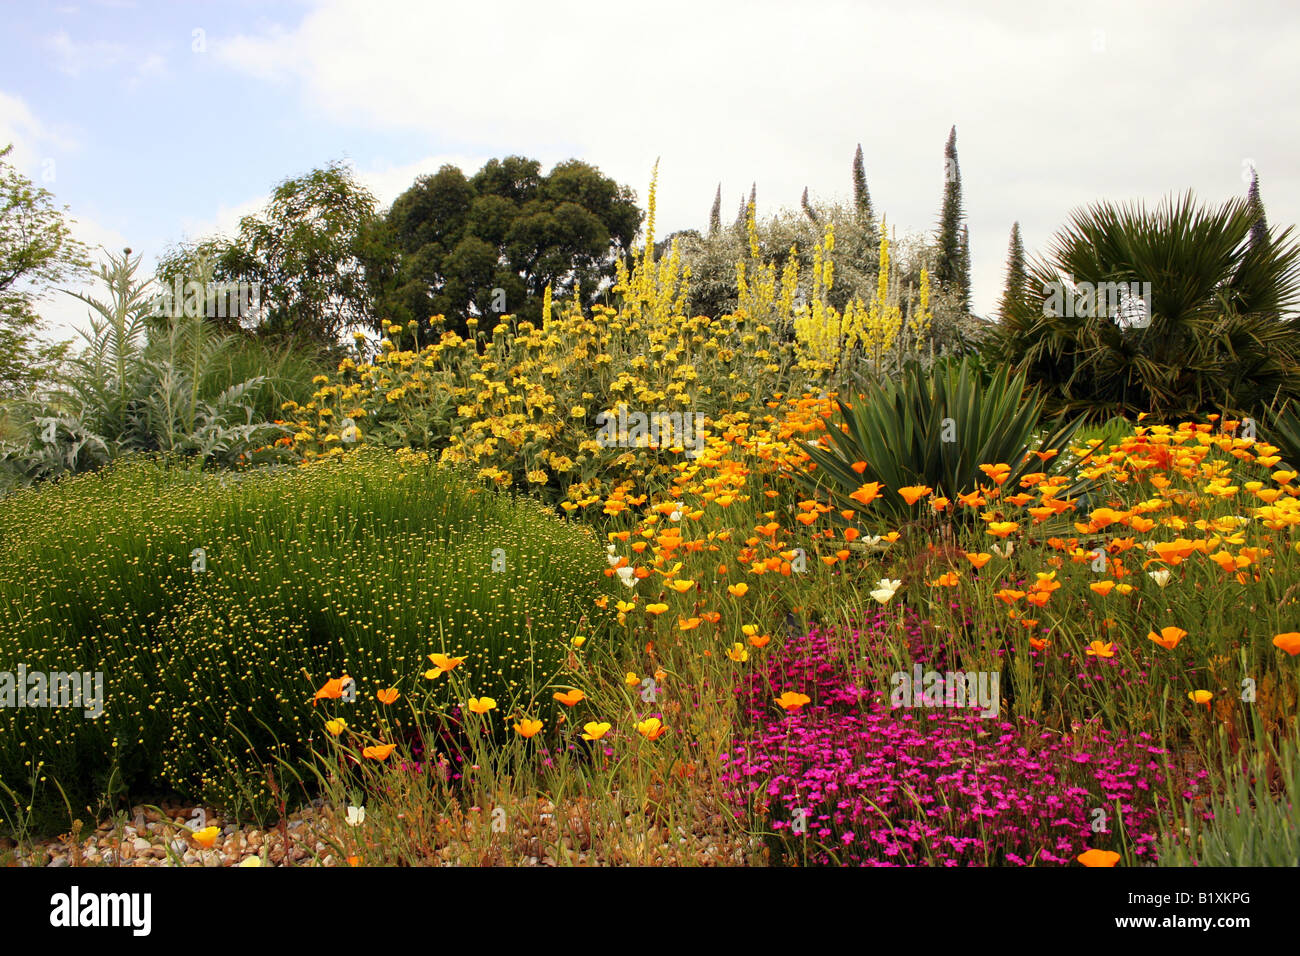 THE DRY GARDEN AT RHS HYDE HALL IN EARLY SUMMER Stock Photo